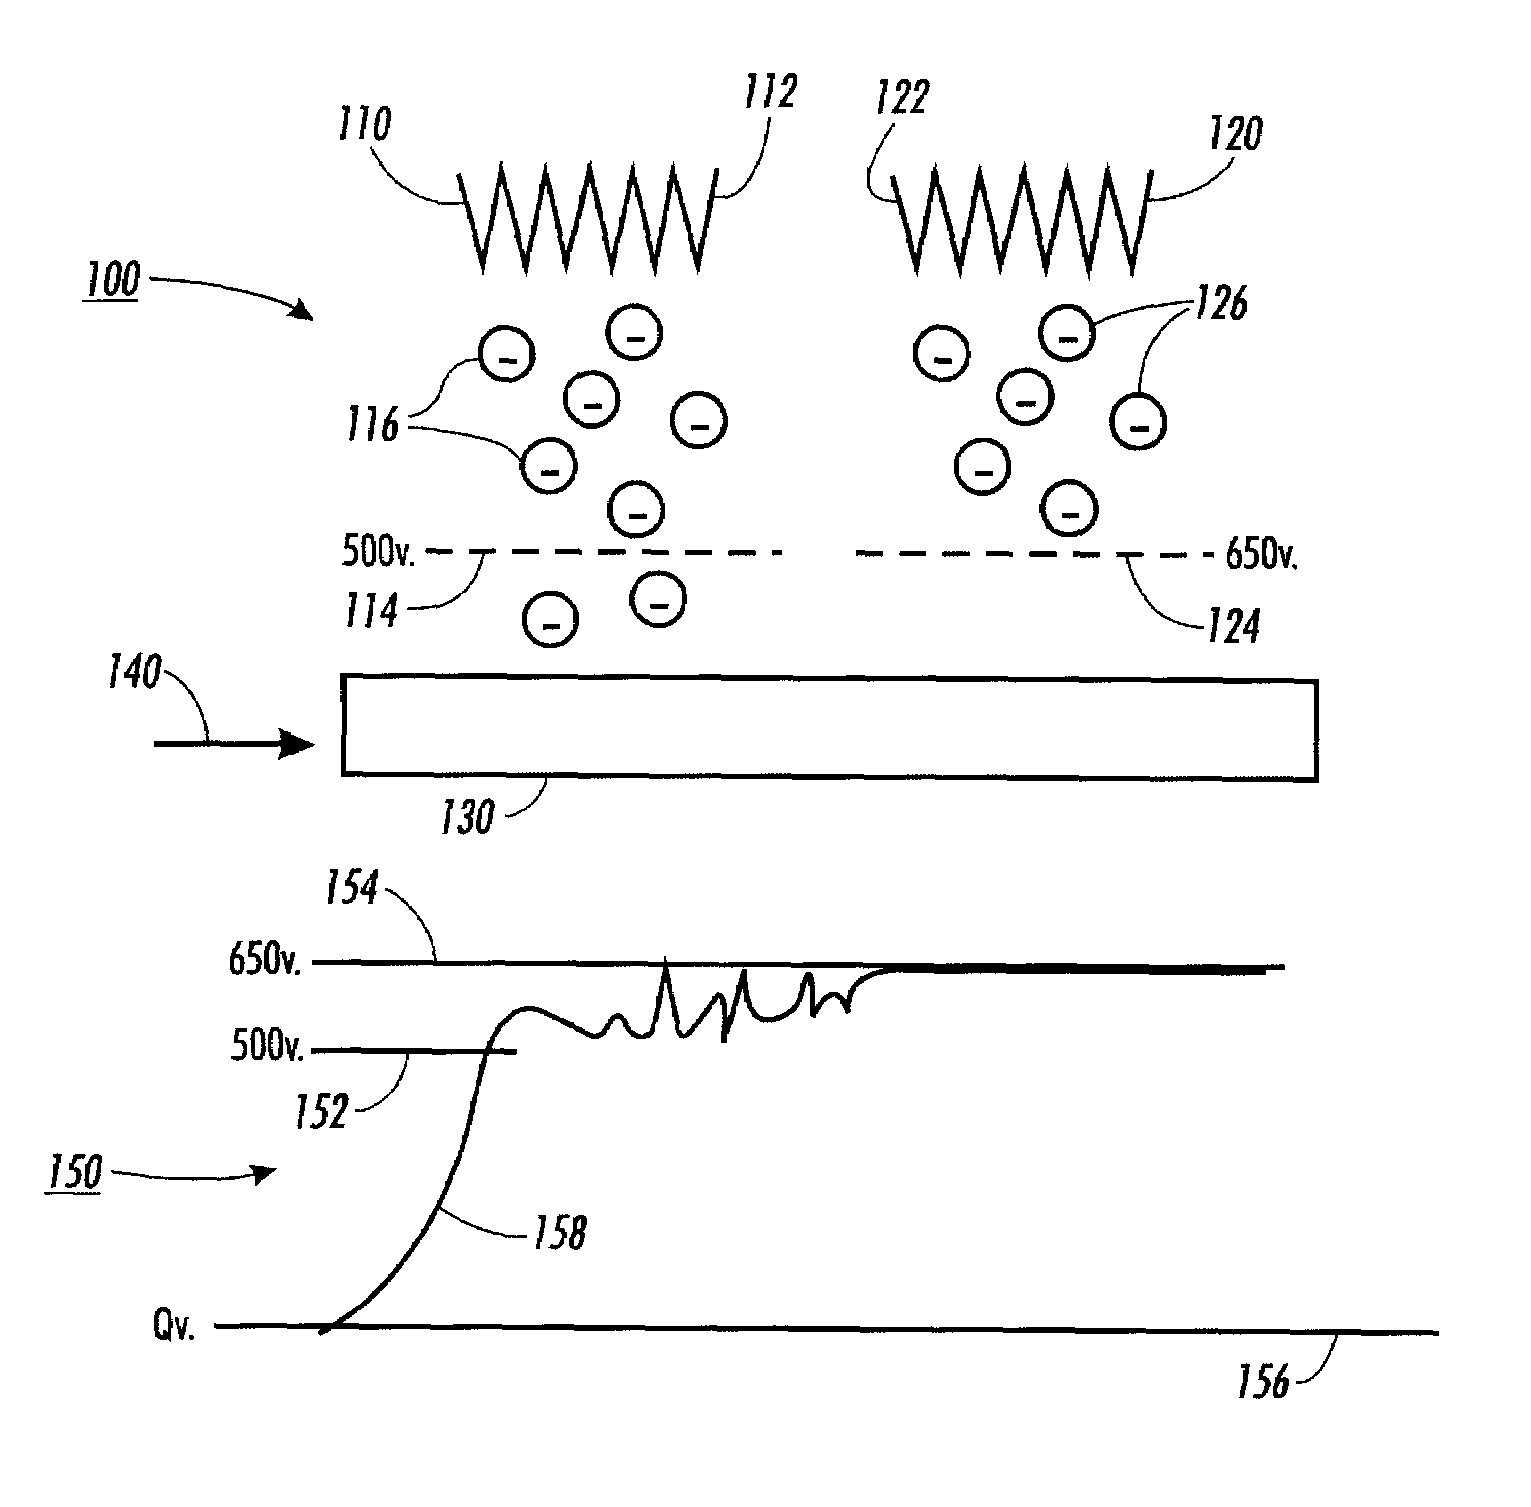 Systems and methods for setting up grid voltages in a tandem pin charging device